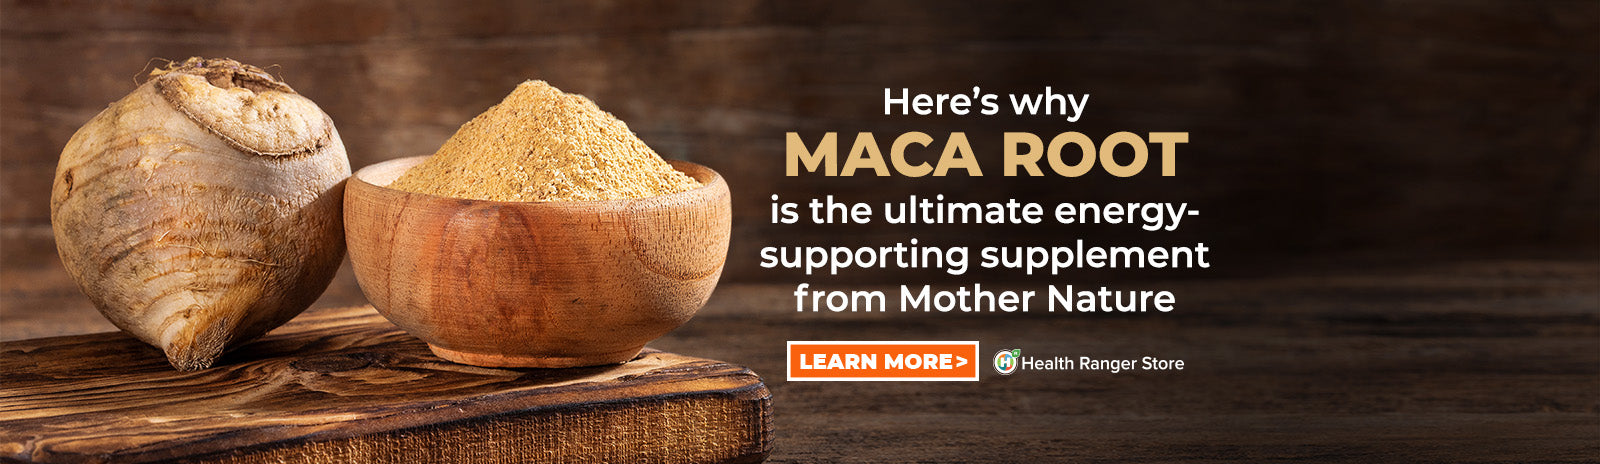 Here’s why Organic Maca Root is the ultimate energy-supporting supplement from Mother Nature